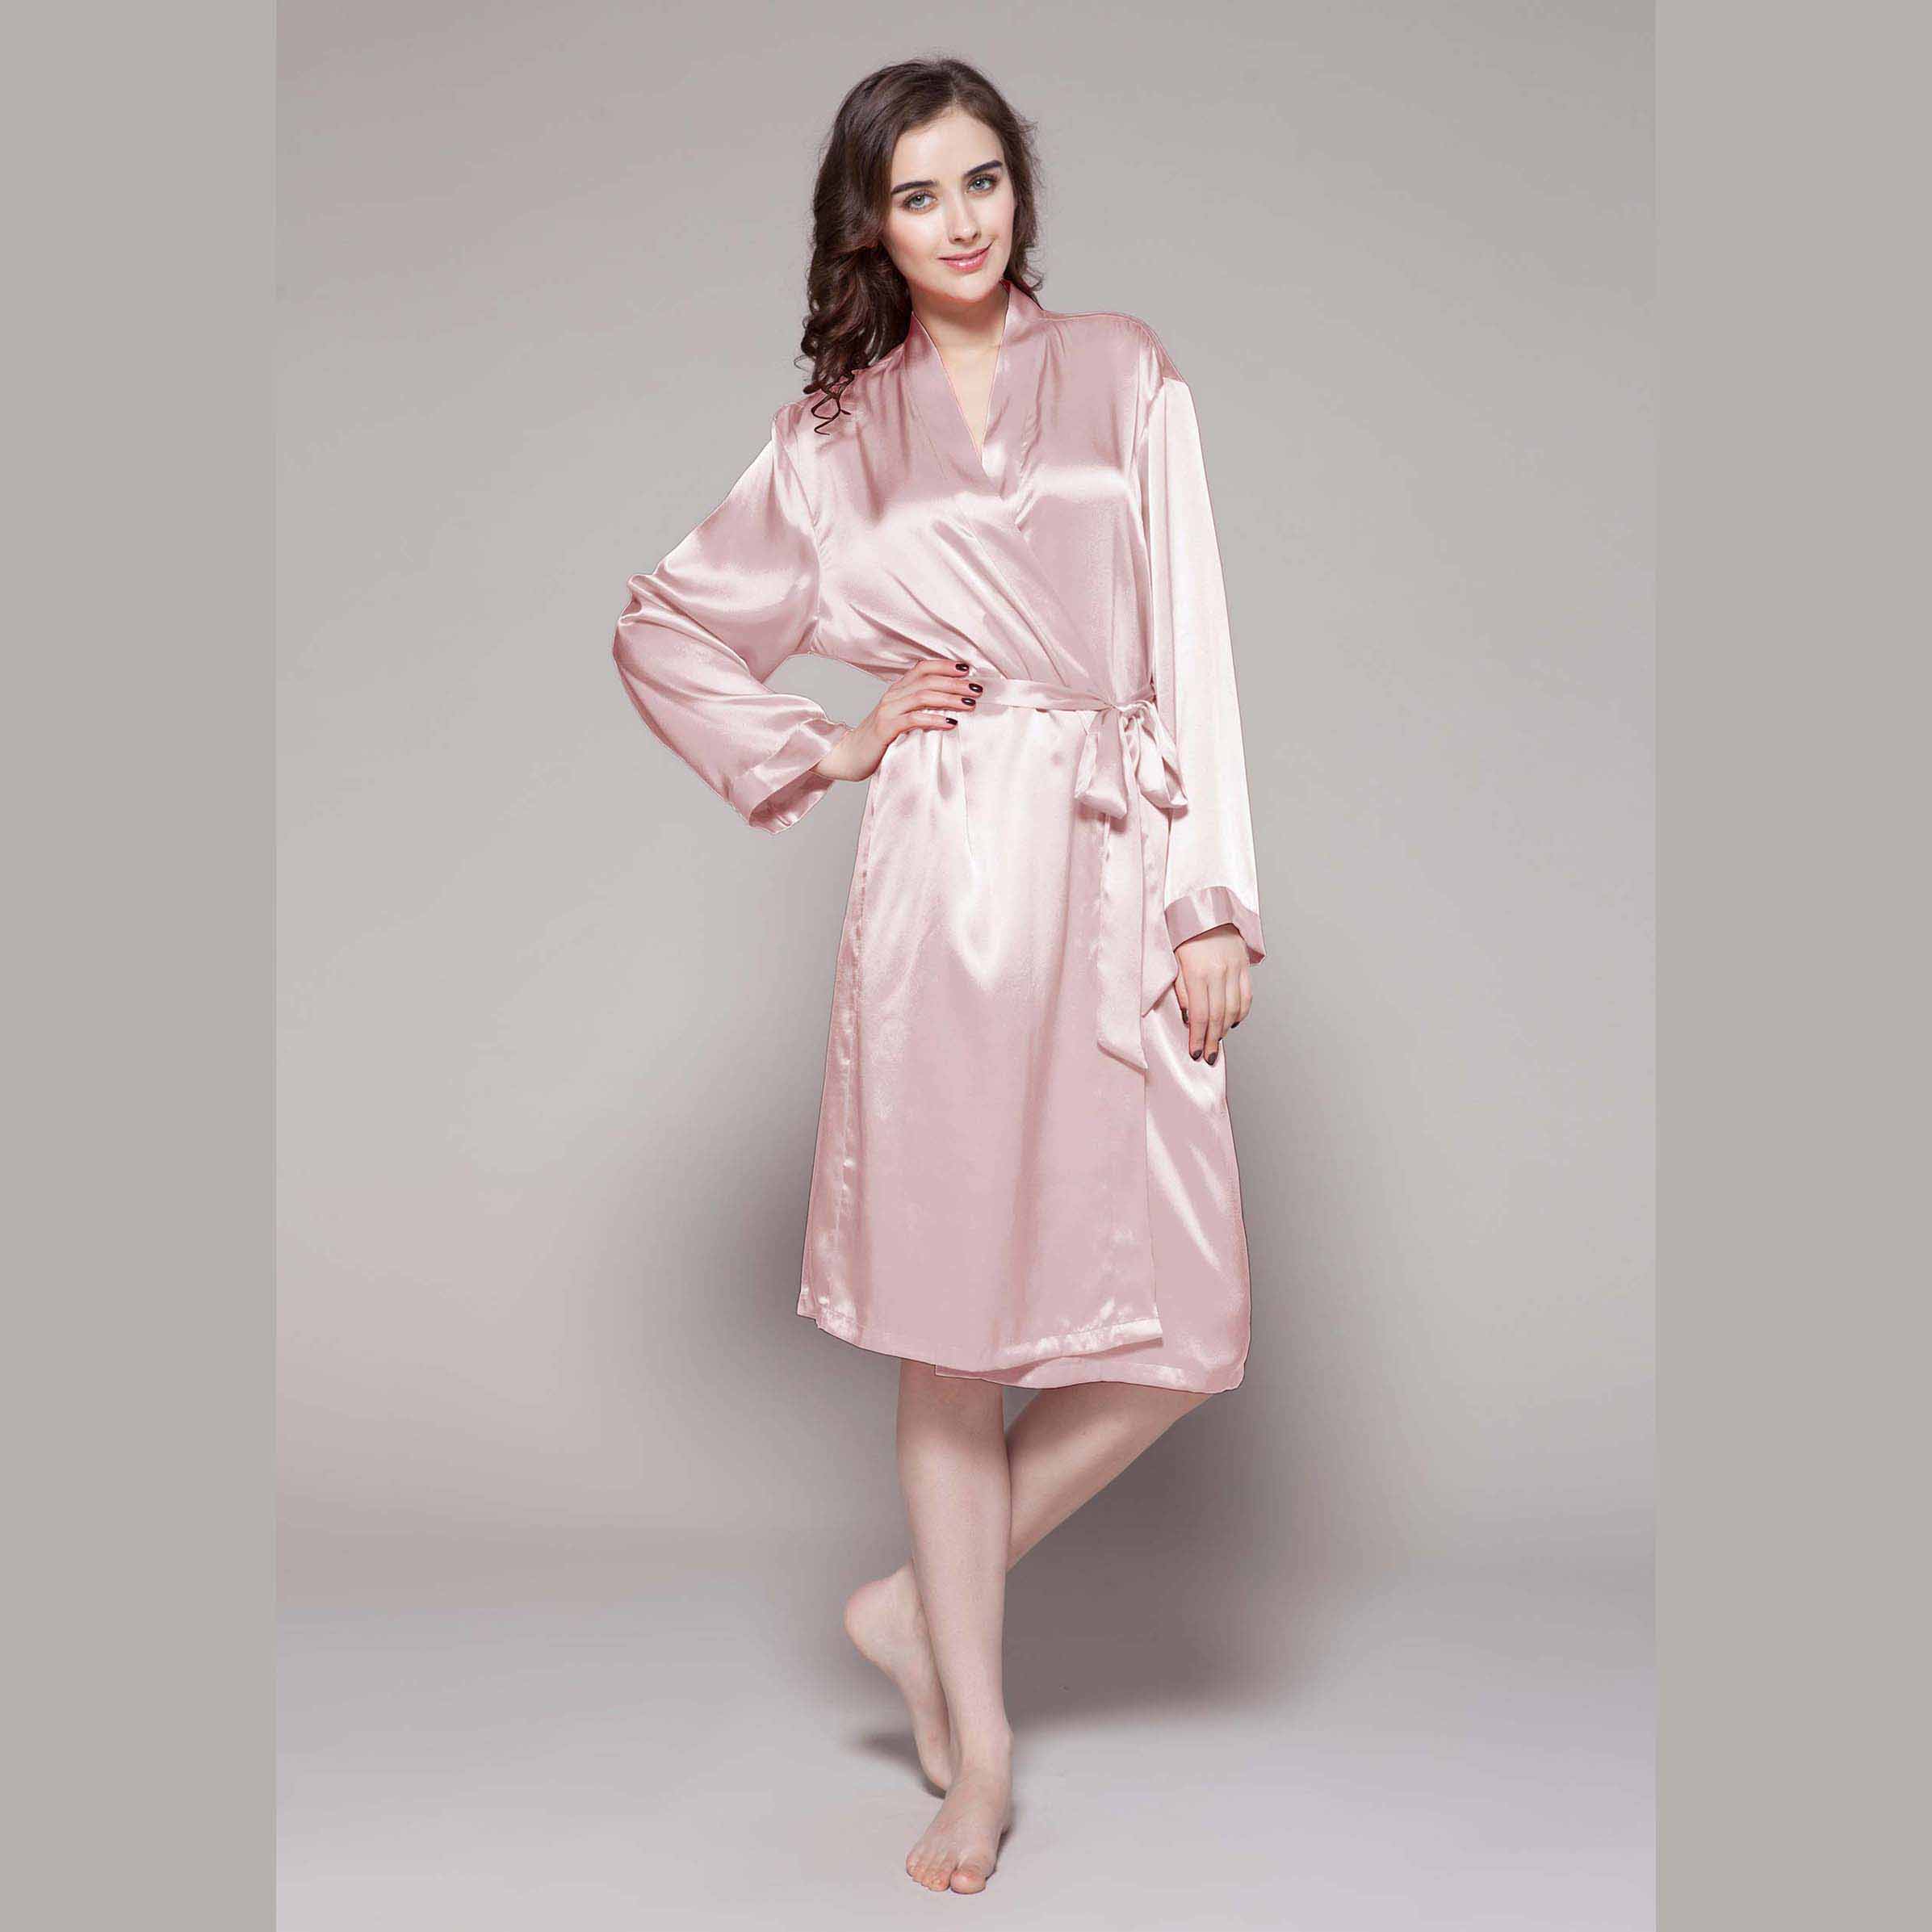 woman wearing a light pink, long robe made from LilySilk